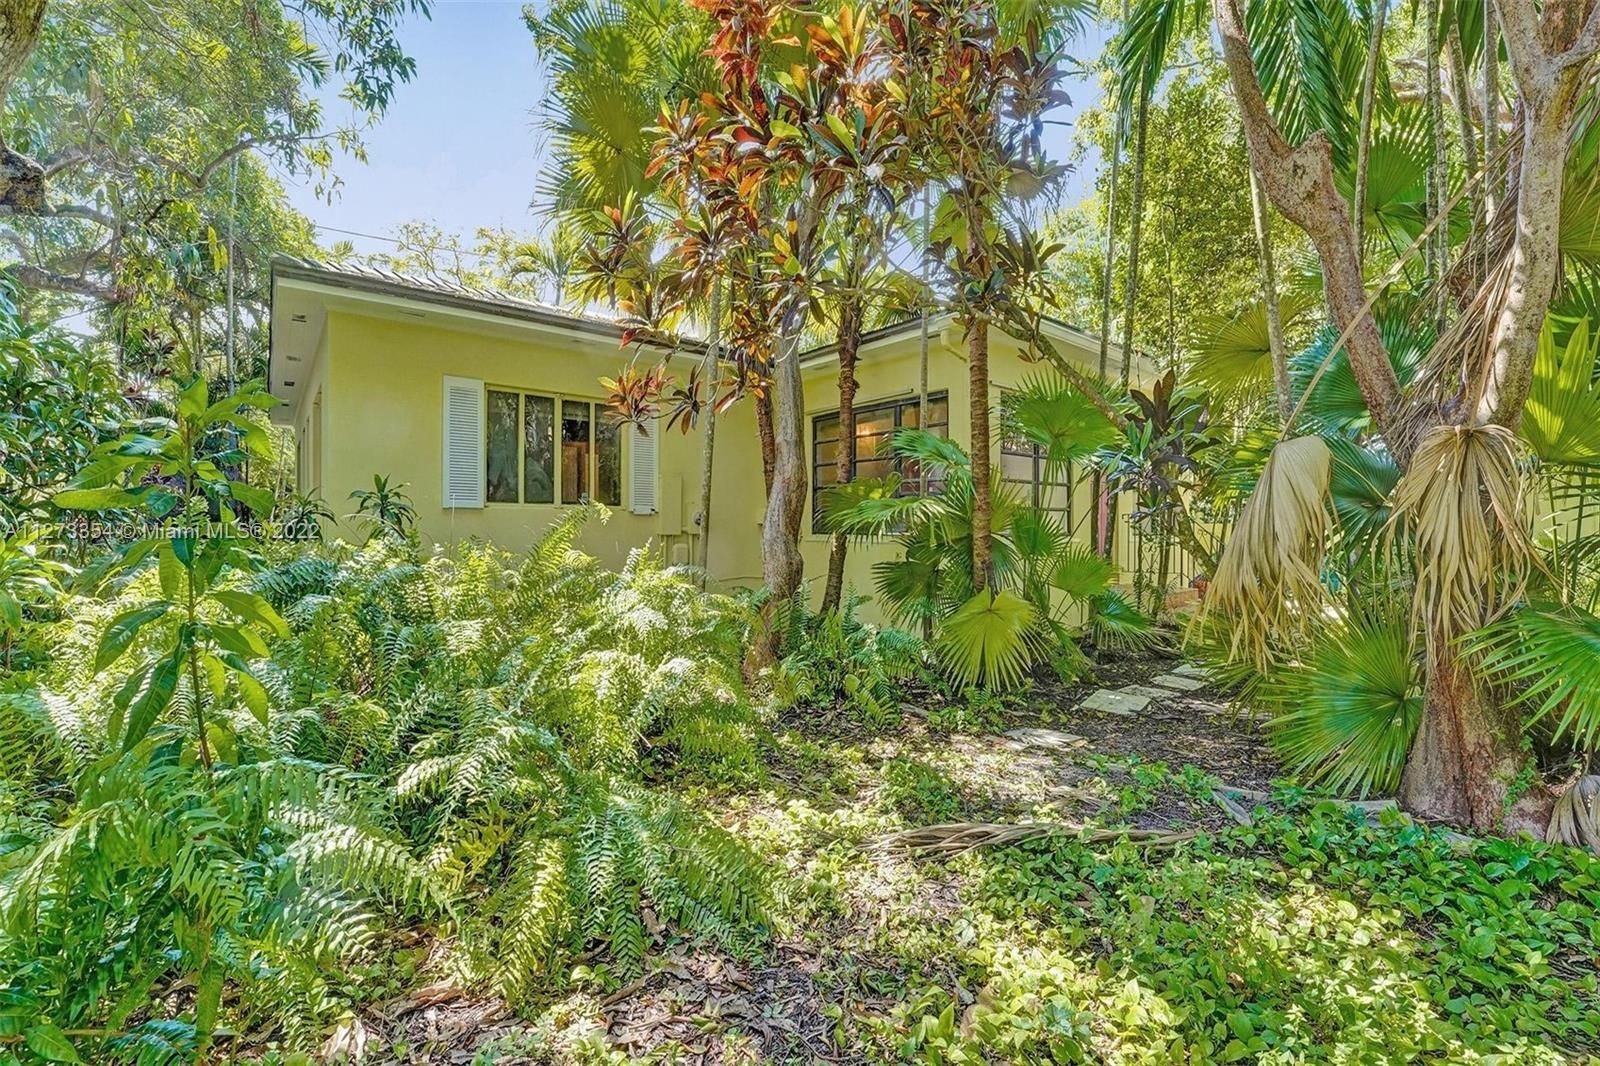 Real estate property located at 107 103rd St, Miami-Dade County, Miami Shores, FL